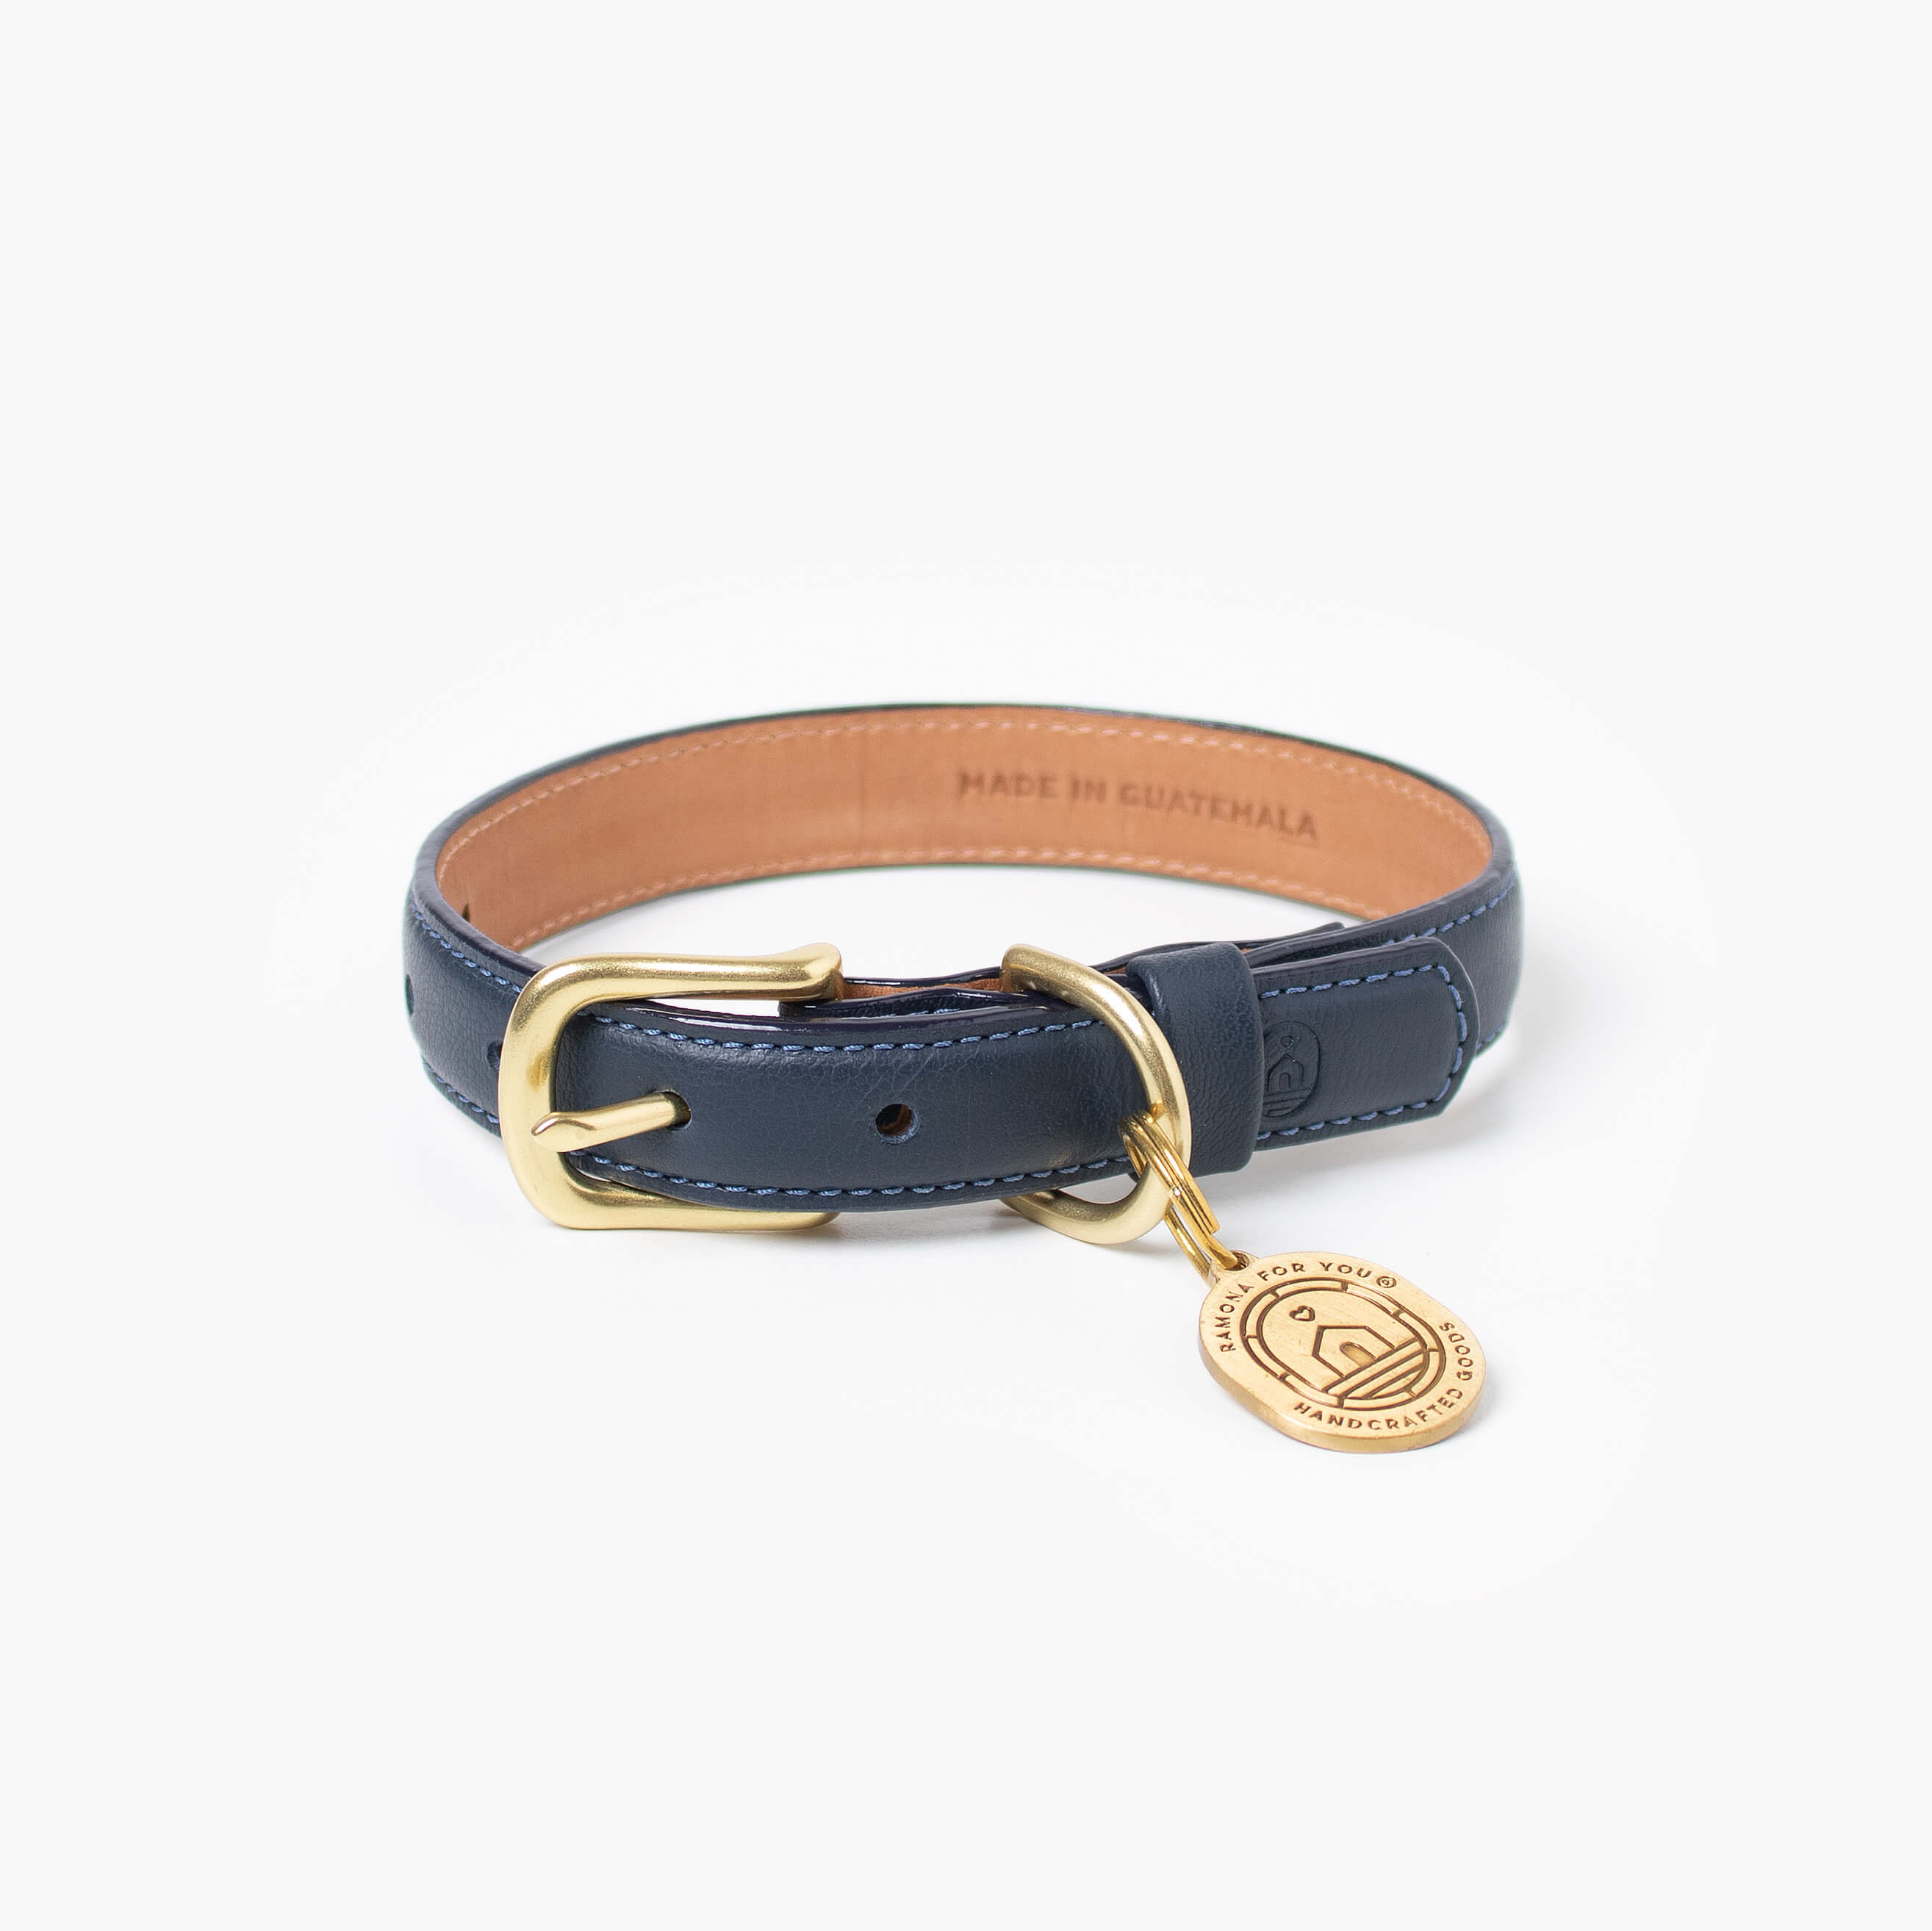 Navy blue leather dog collar with with brass hardware and tag ID. Luxury dog collar.